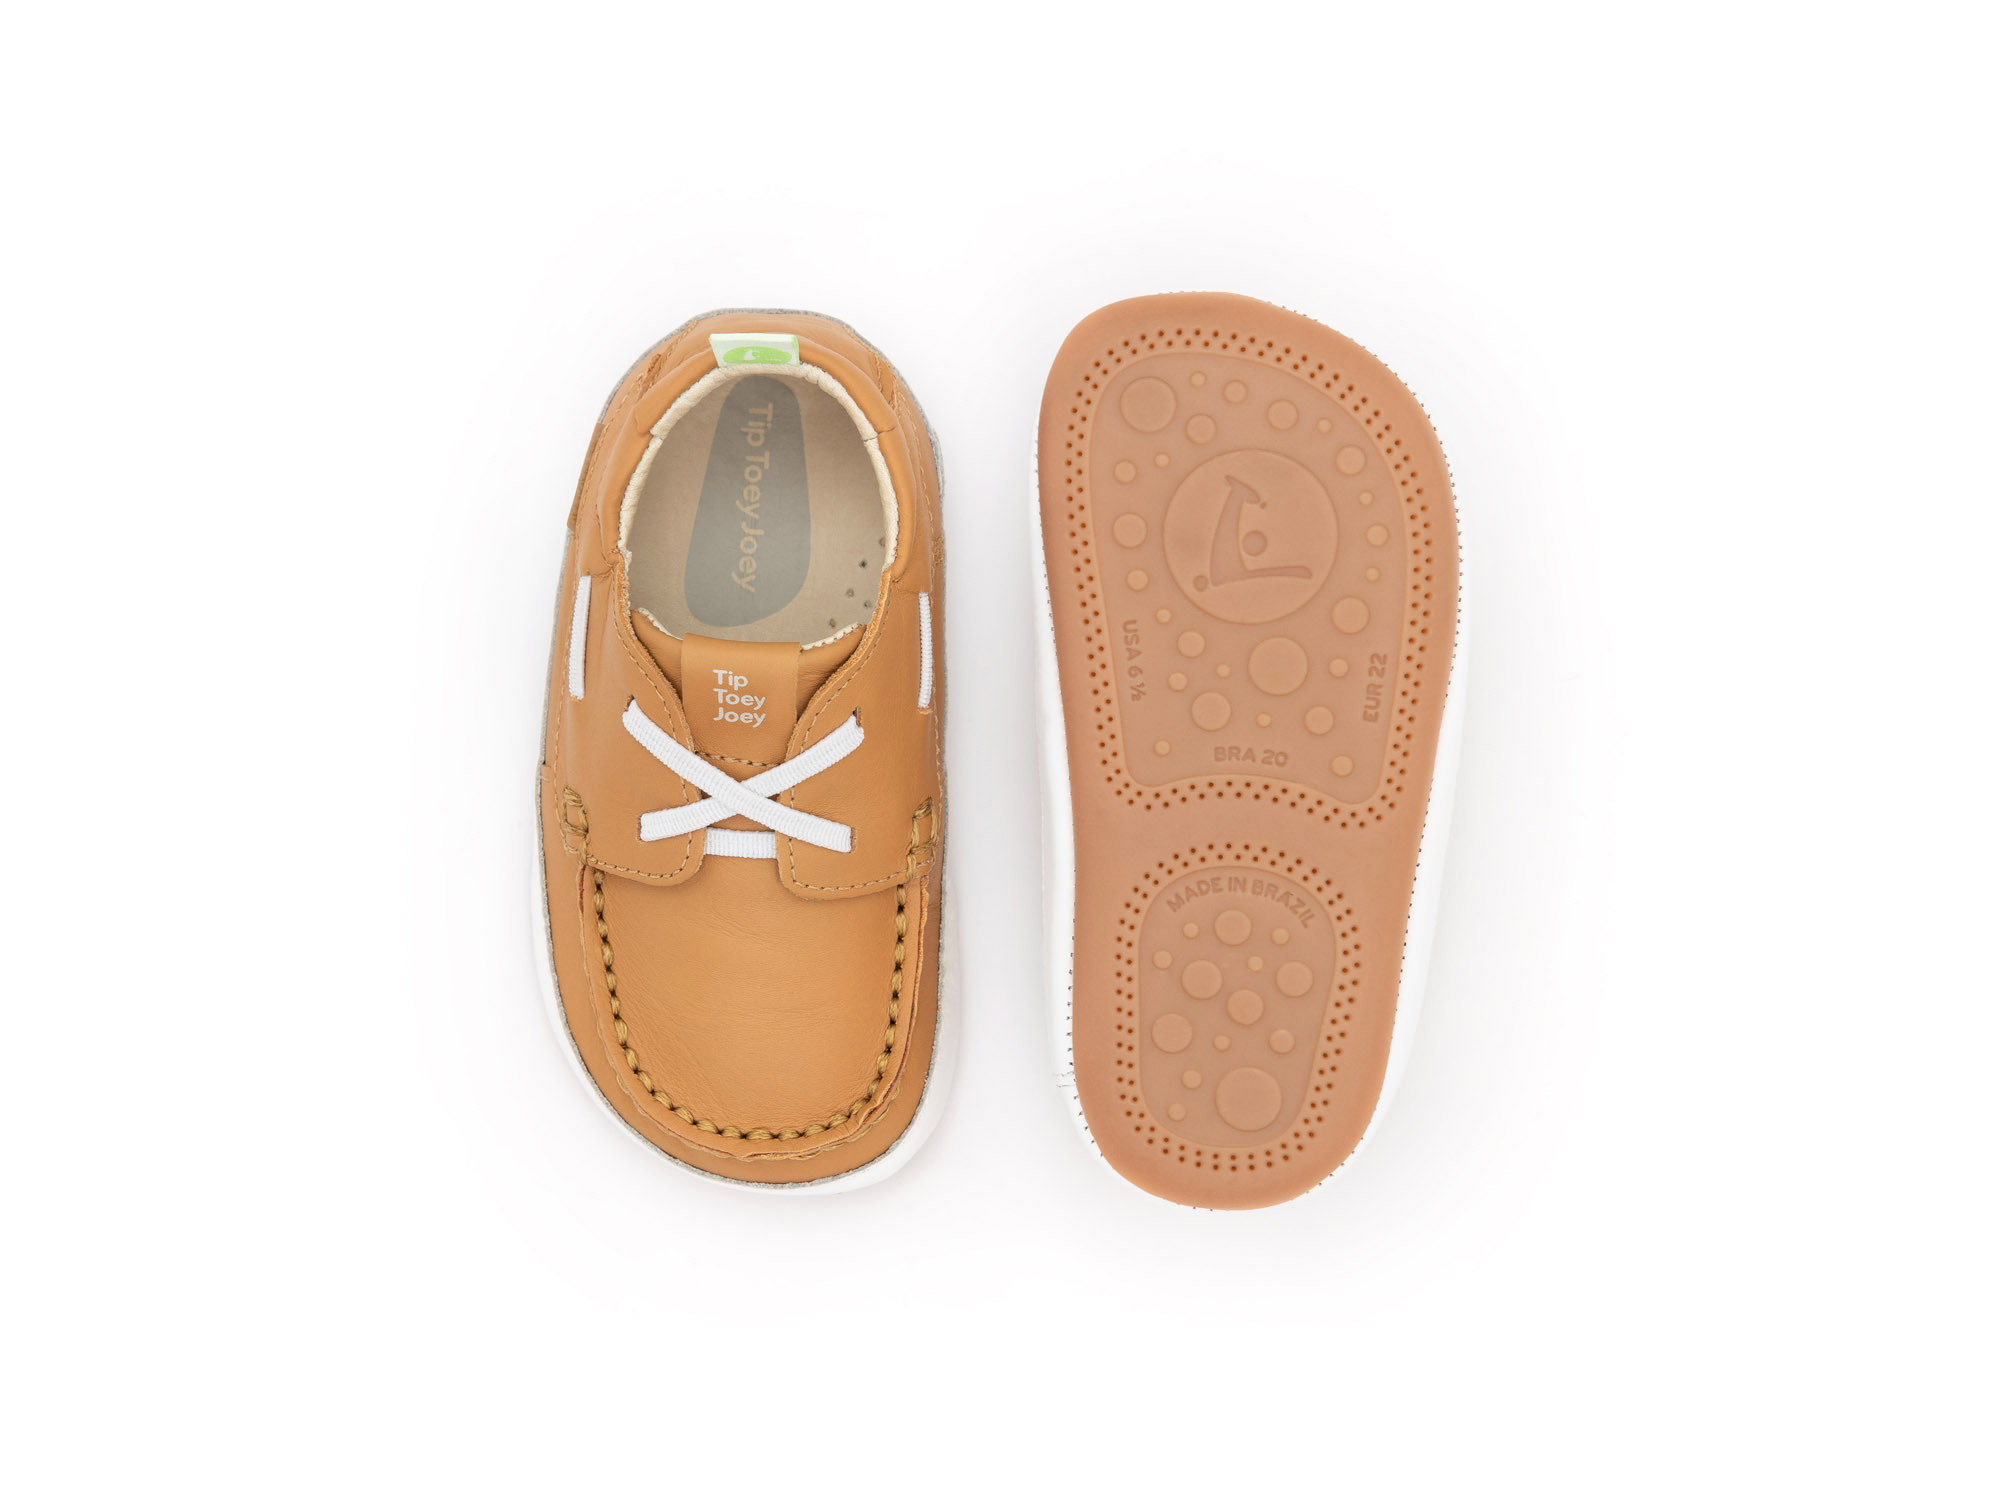 UP & GO Sneakers for Boys Boaty | Tip Toey Joey - Australia - 2